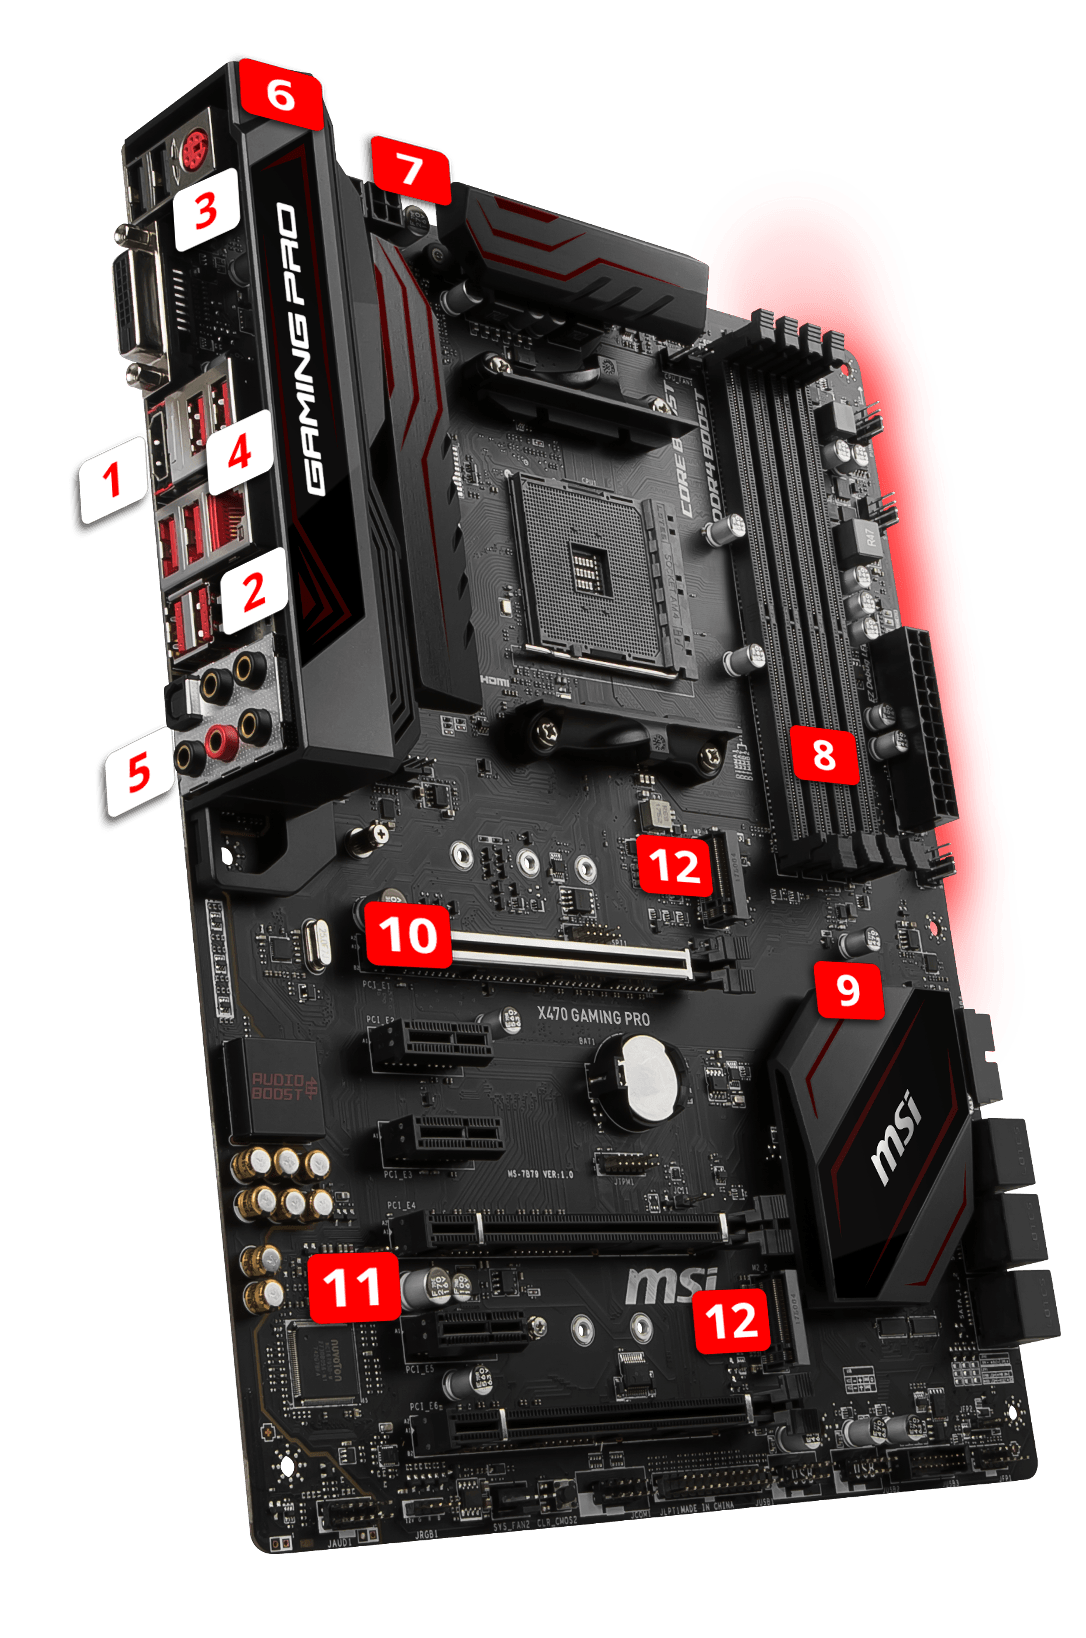 MSI X470 GAMING PRO overview